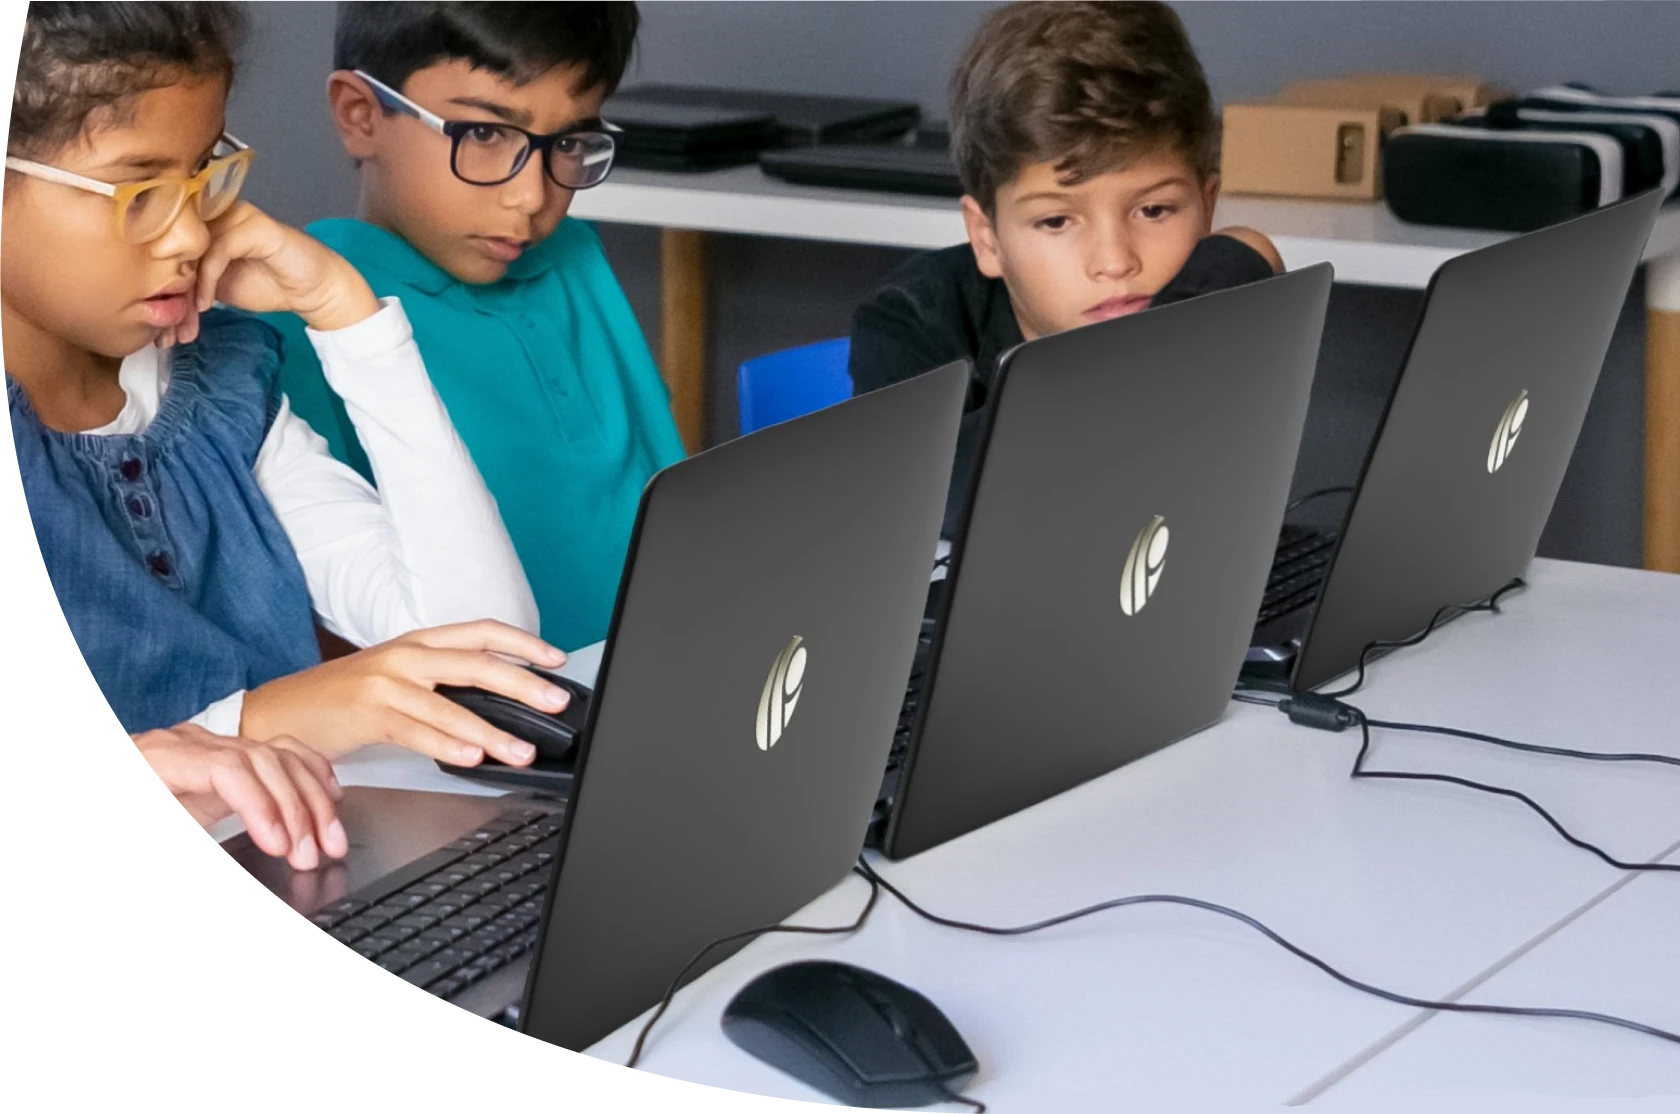 Three kids joyfully using sleek Primebook laptops while captivated by the screen.